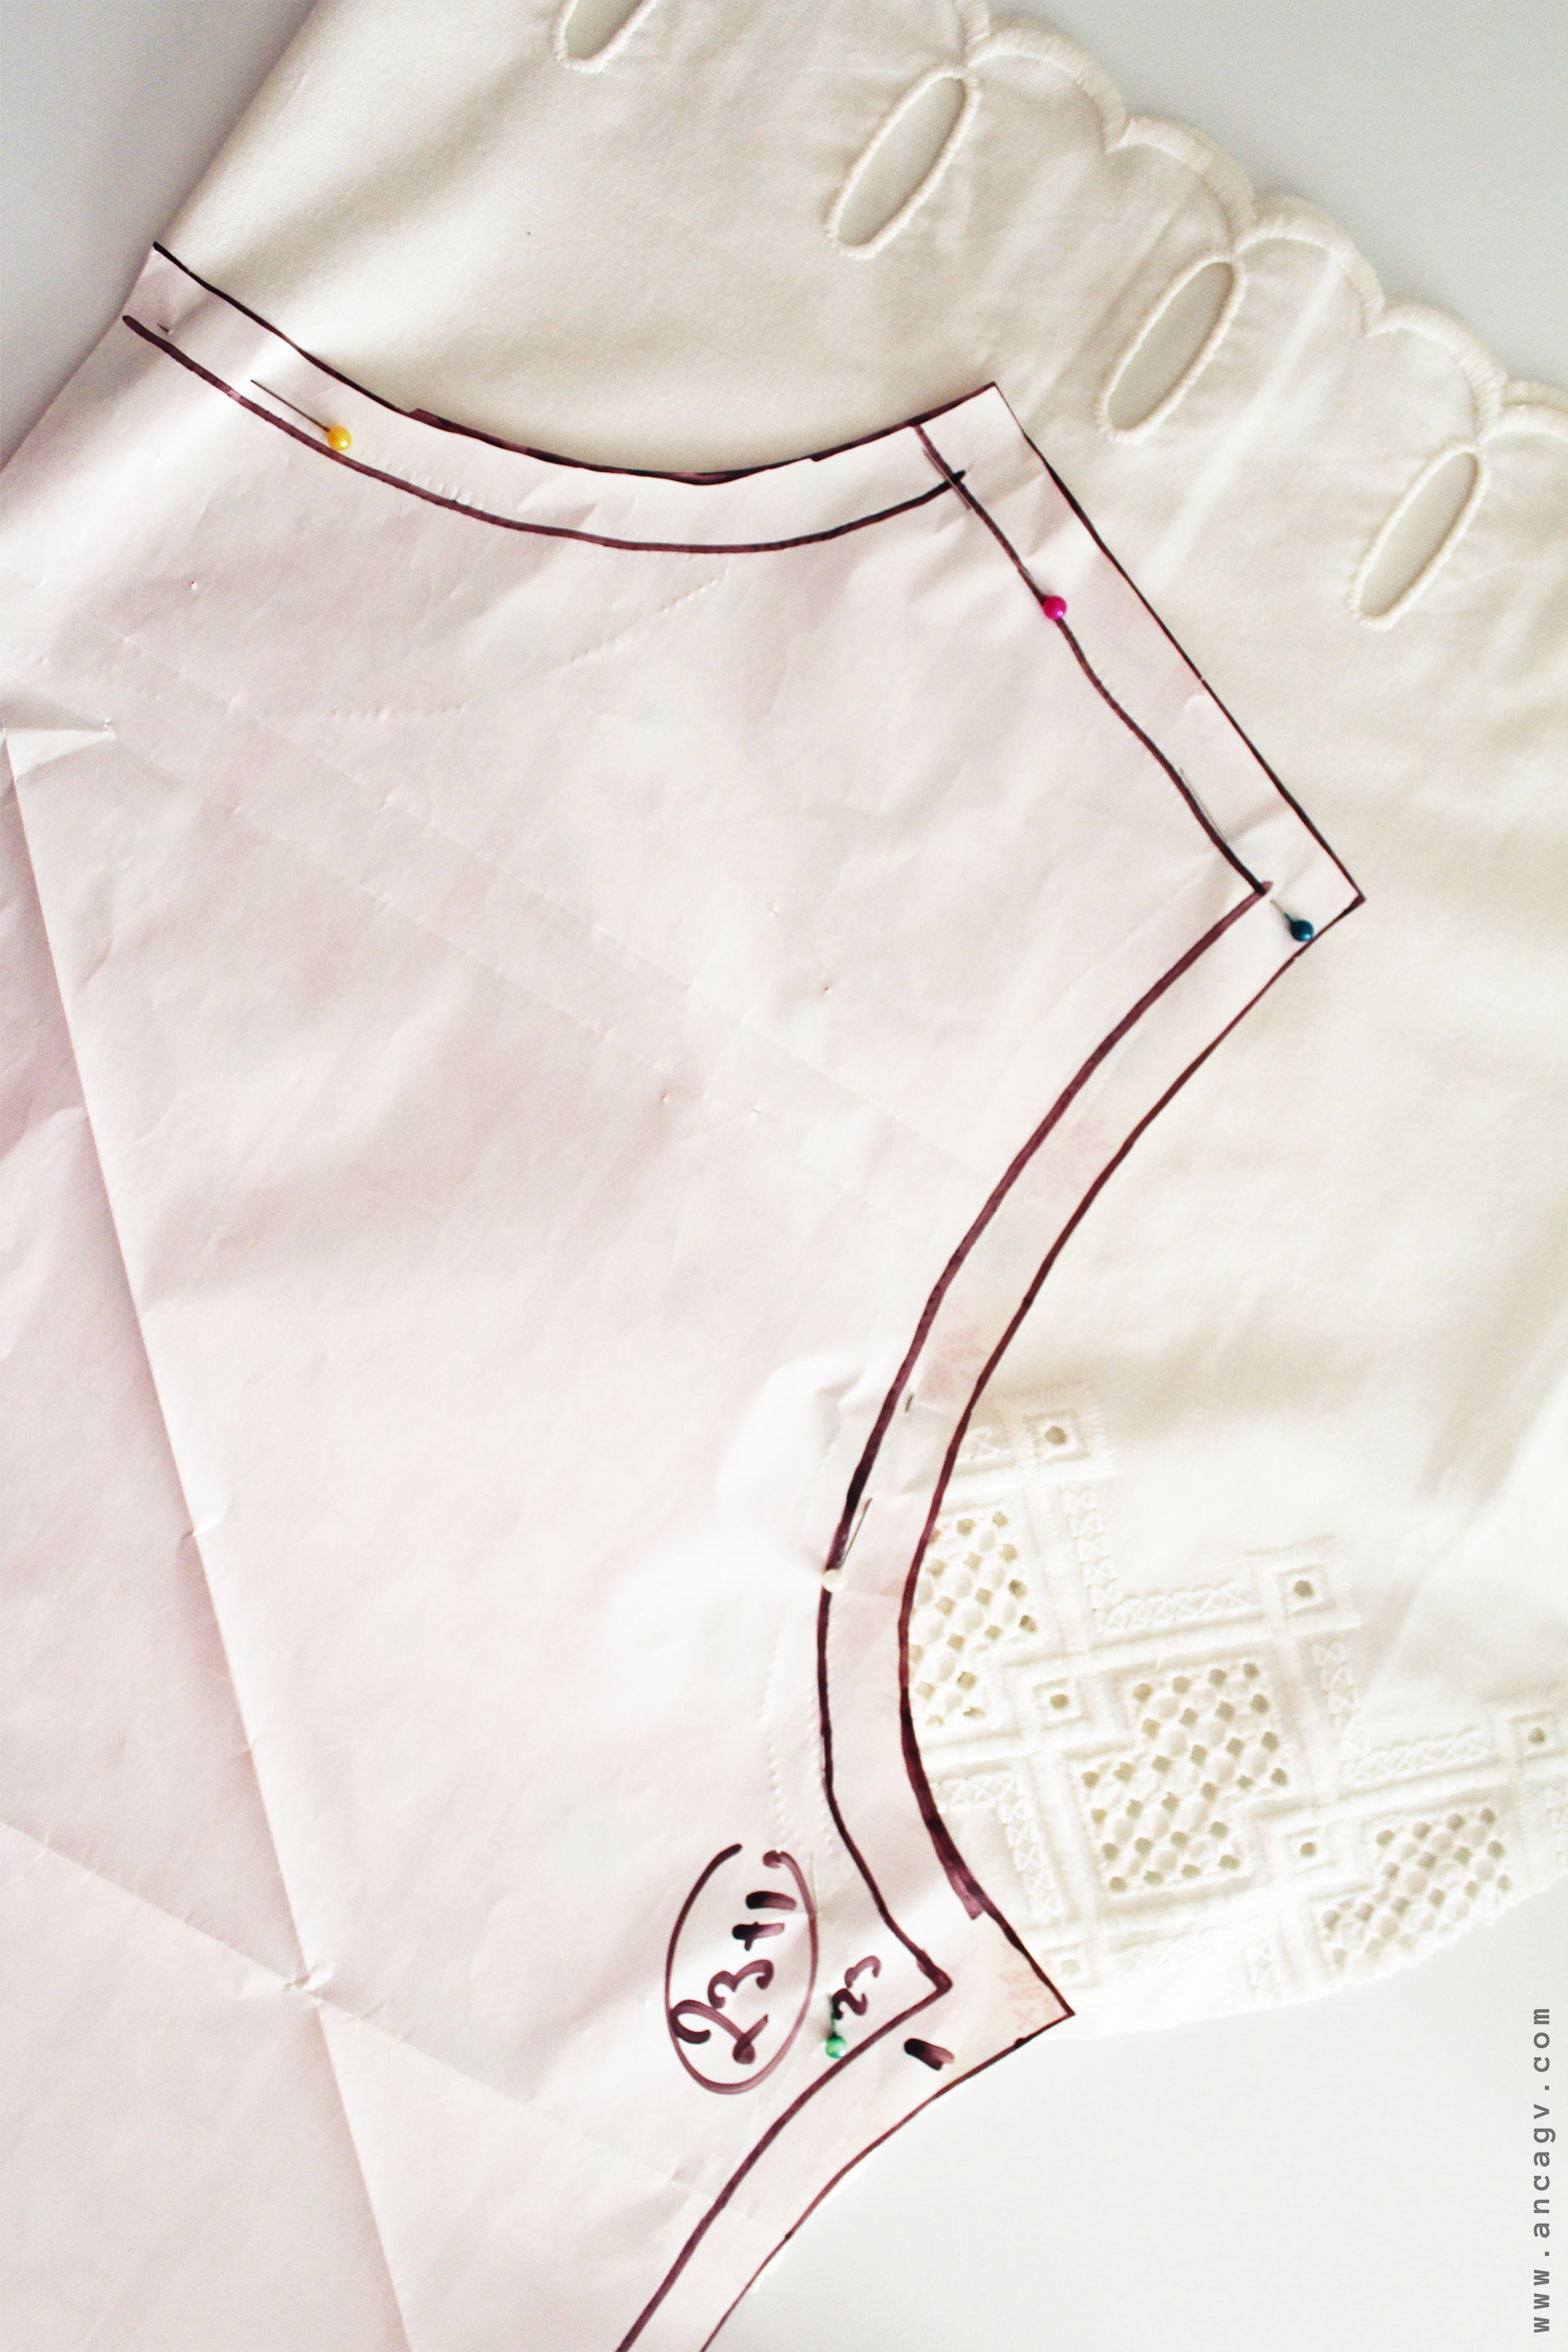 diy-embroidery-blouse5